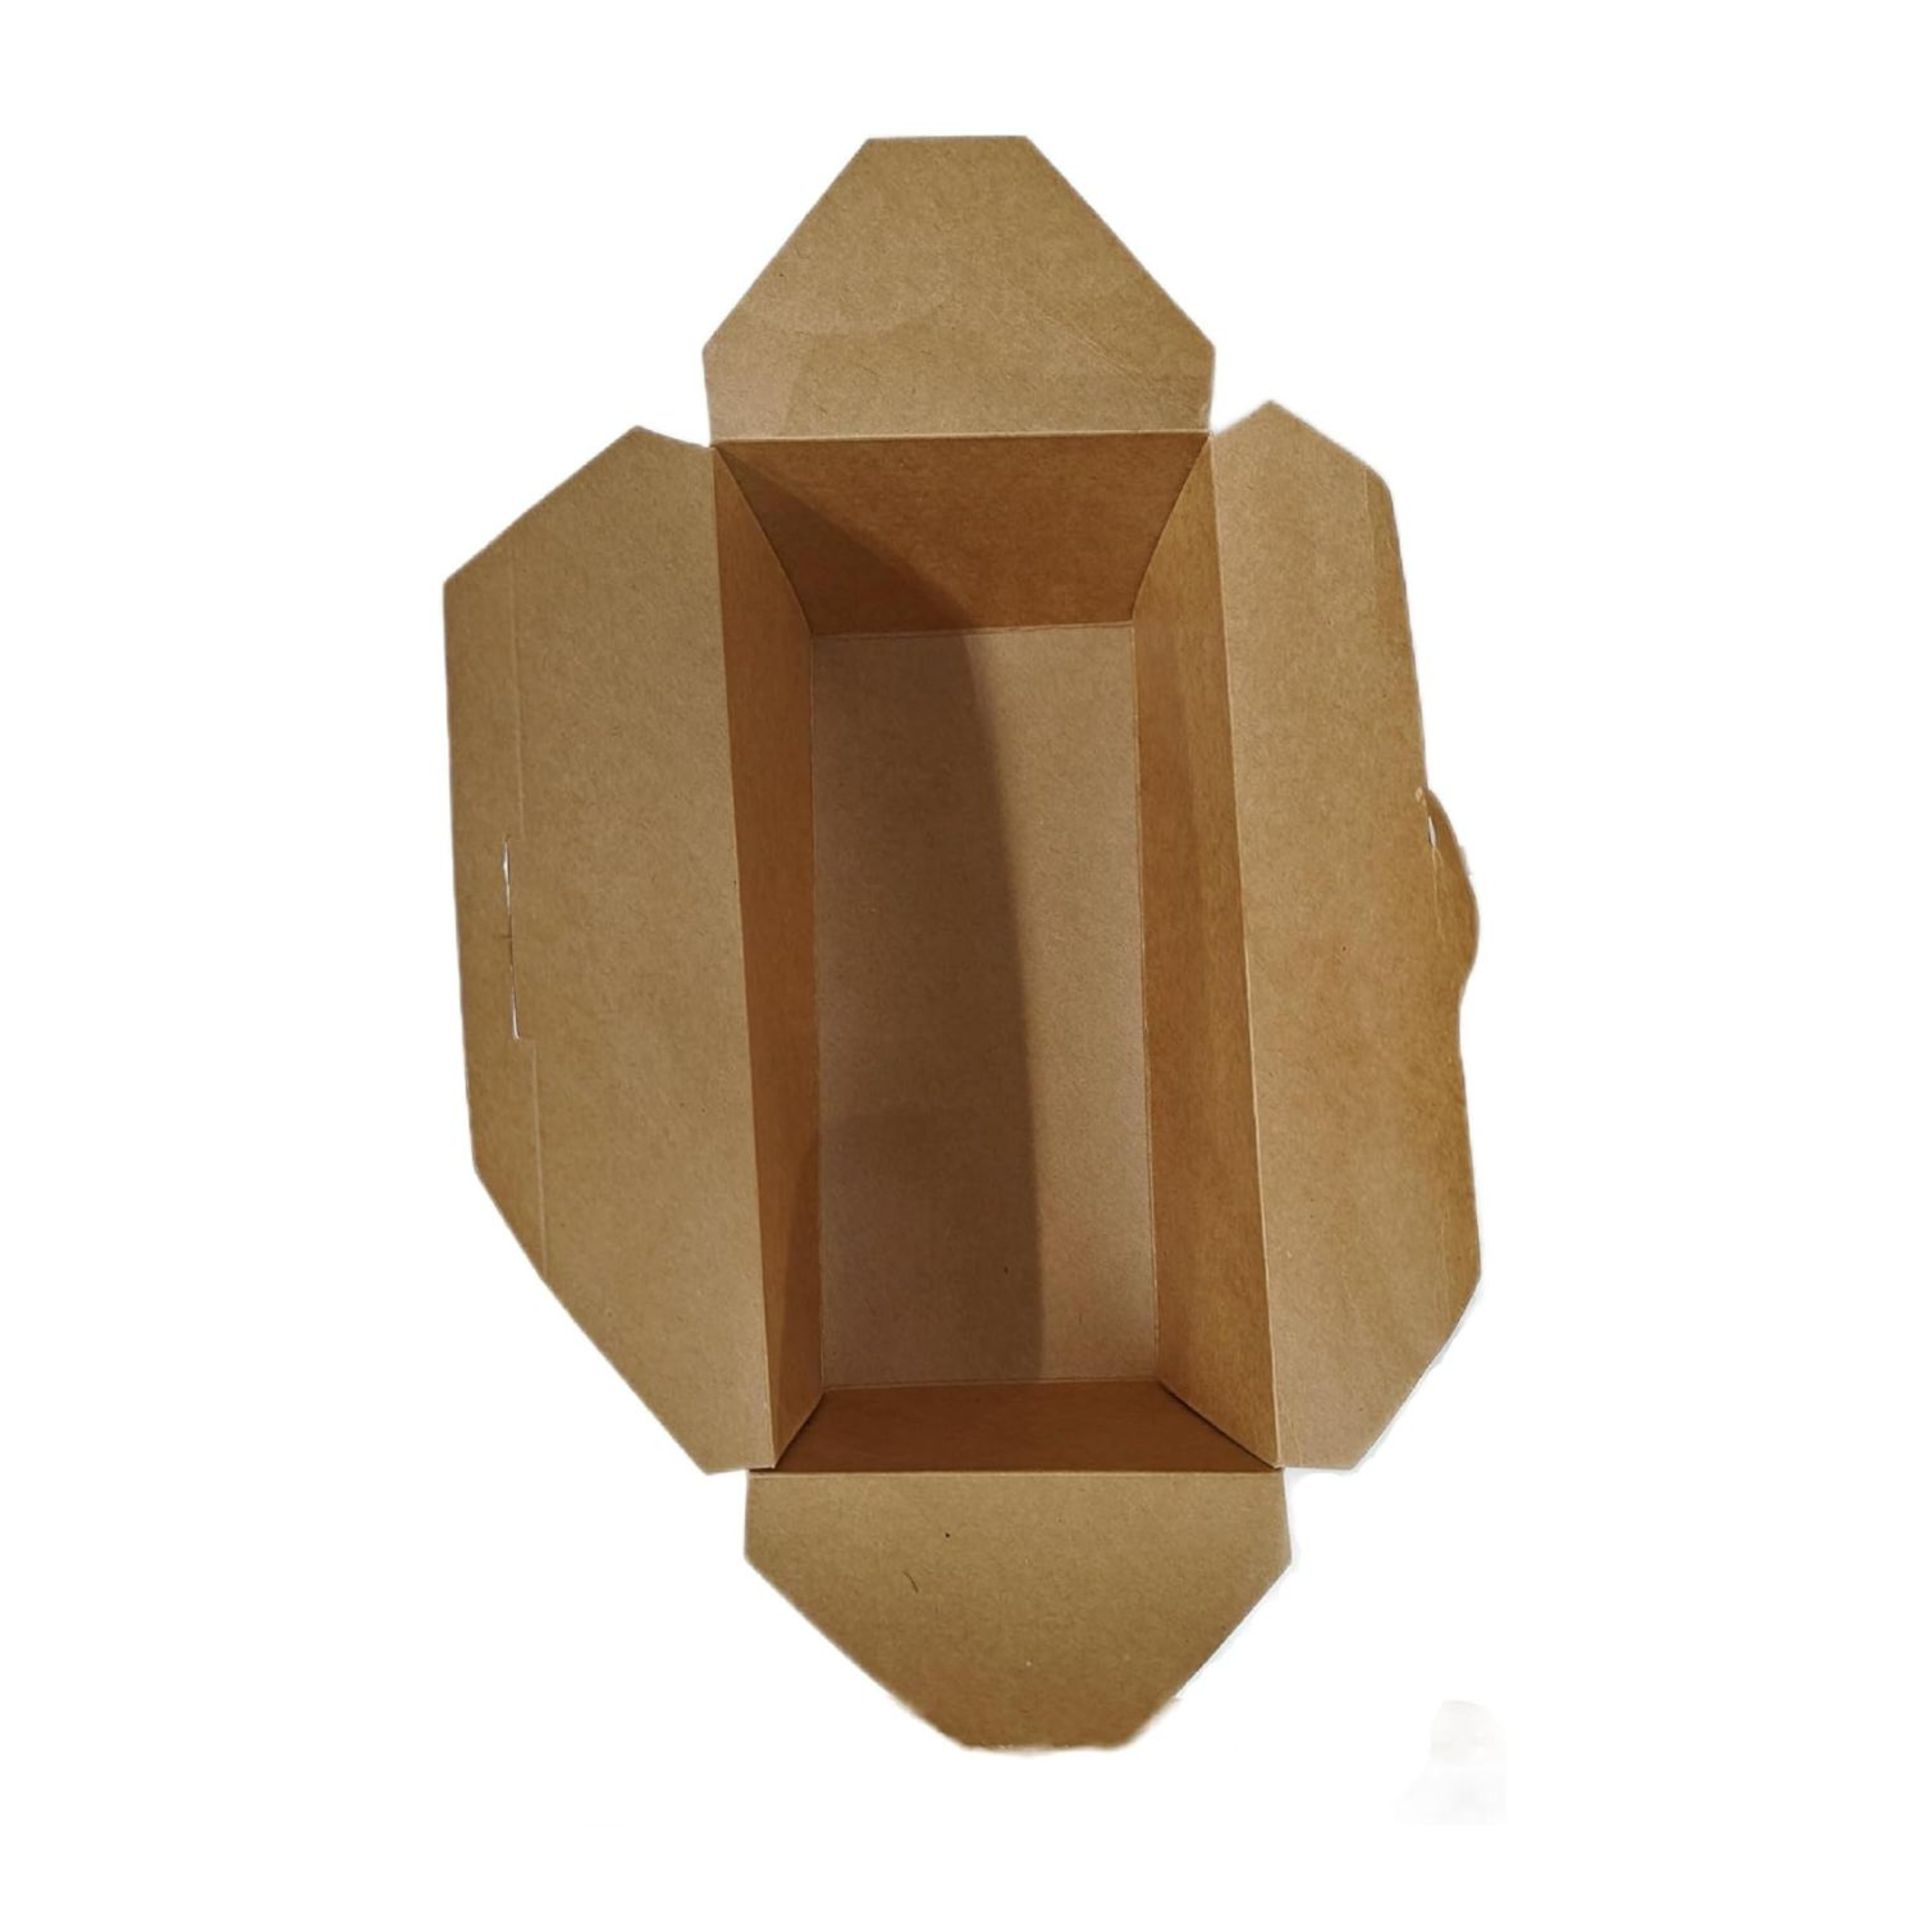 10 BOXES OF 40 FOOD TAKEAWAY BOXES, DISPOSABLE KRAFT BOXES - Image 2 of 4